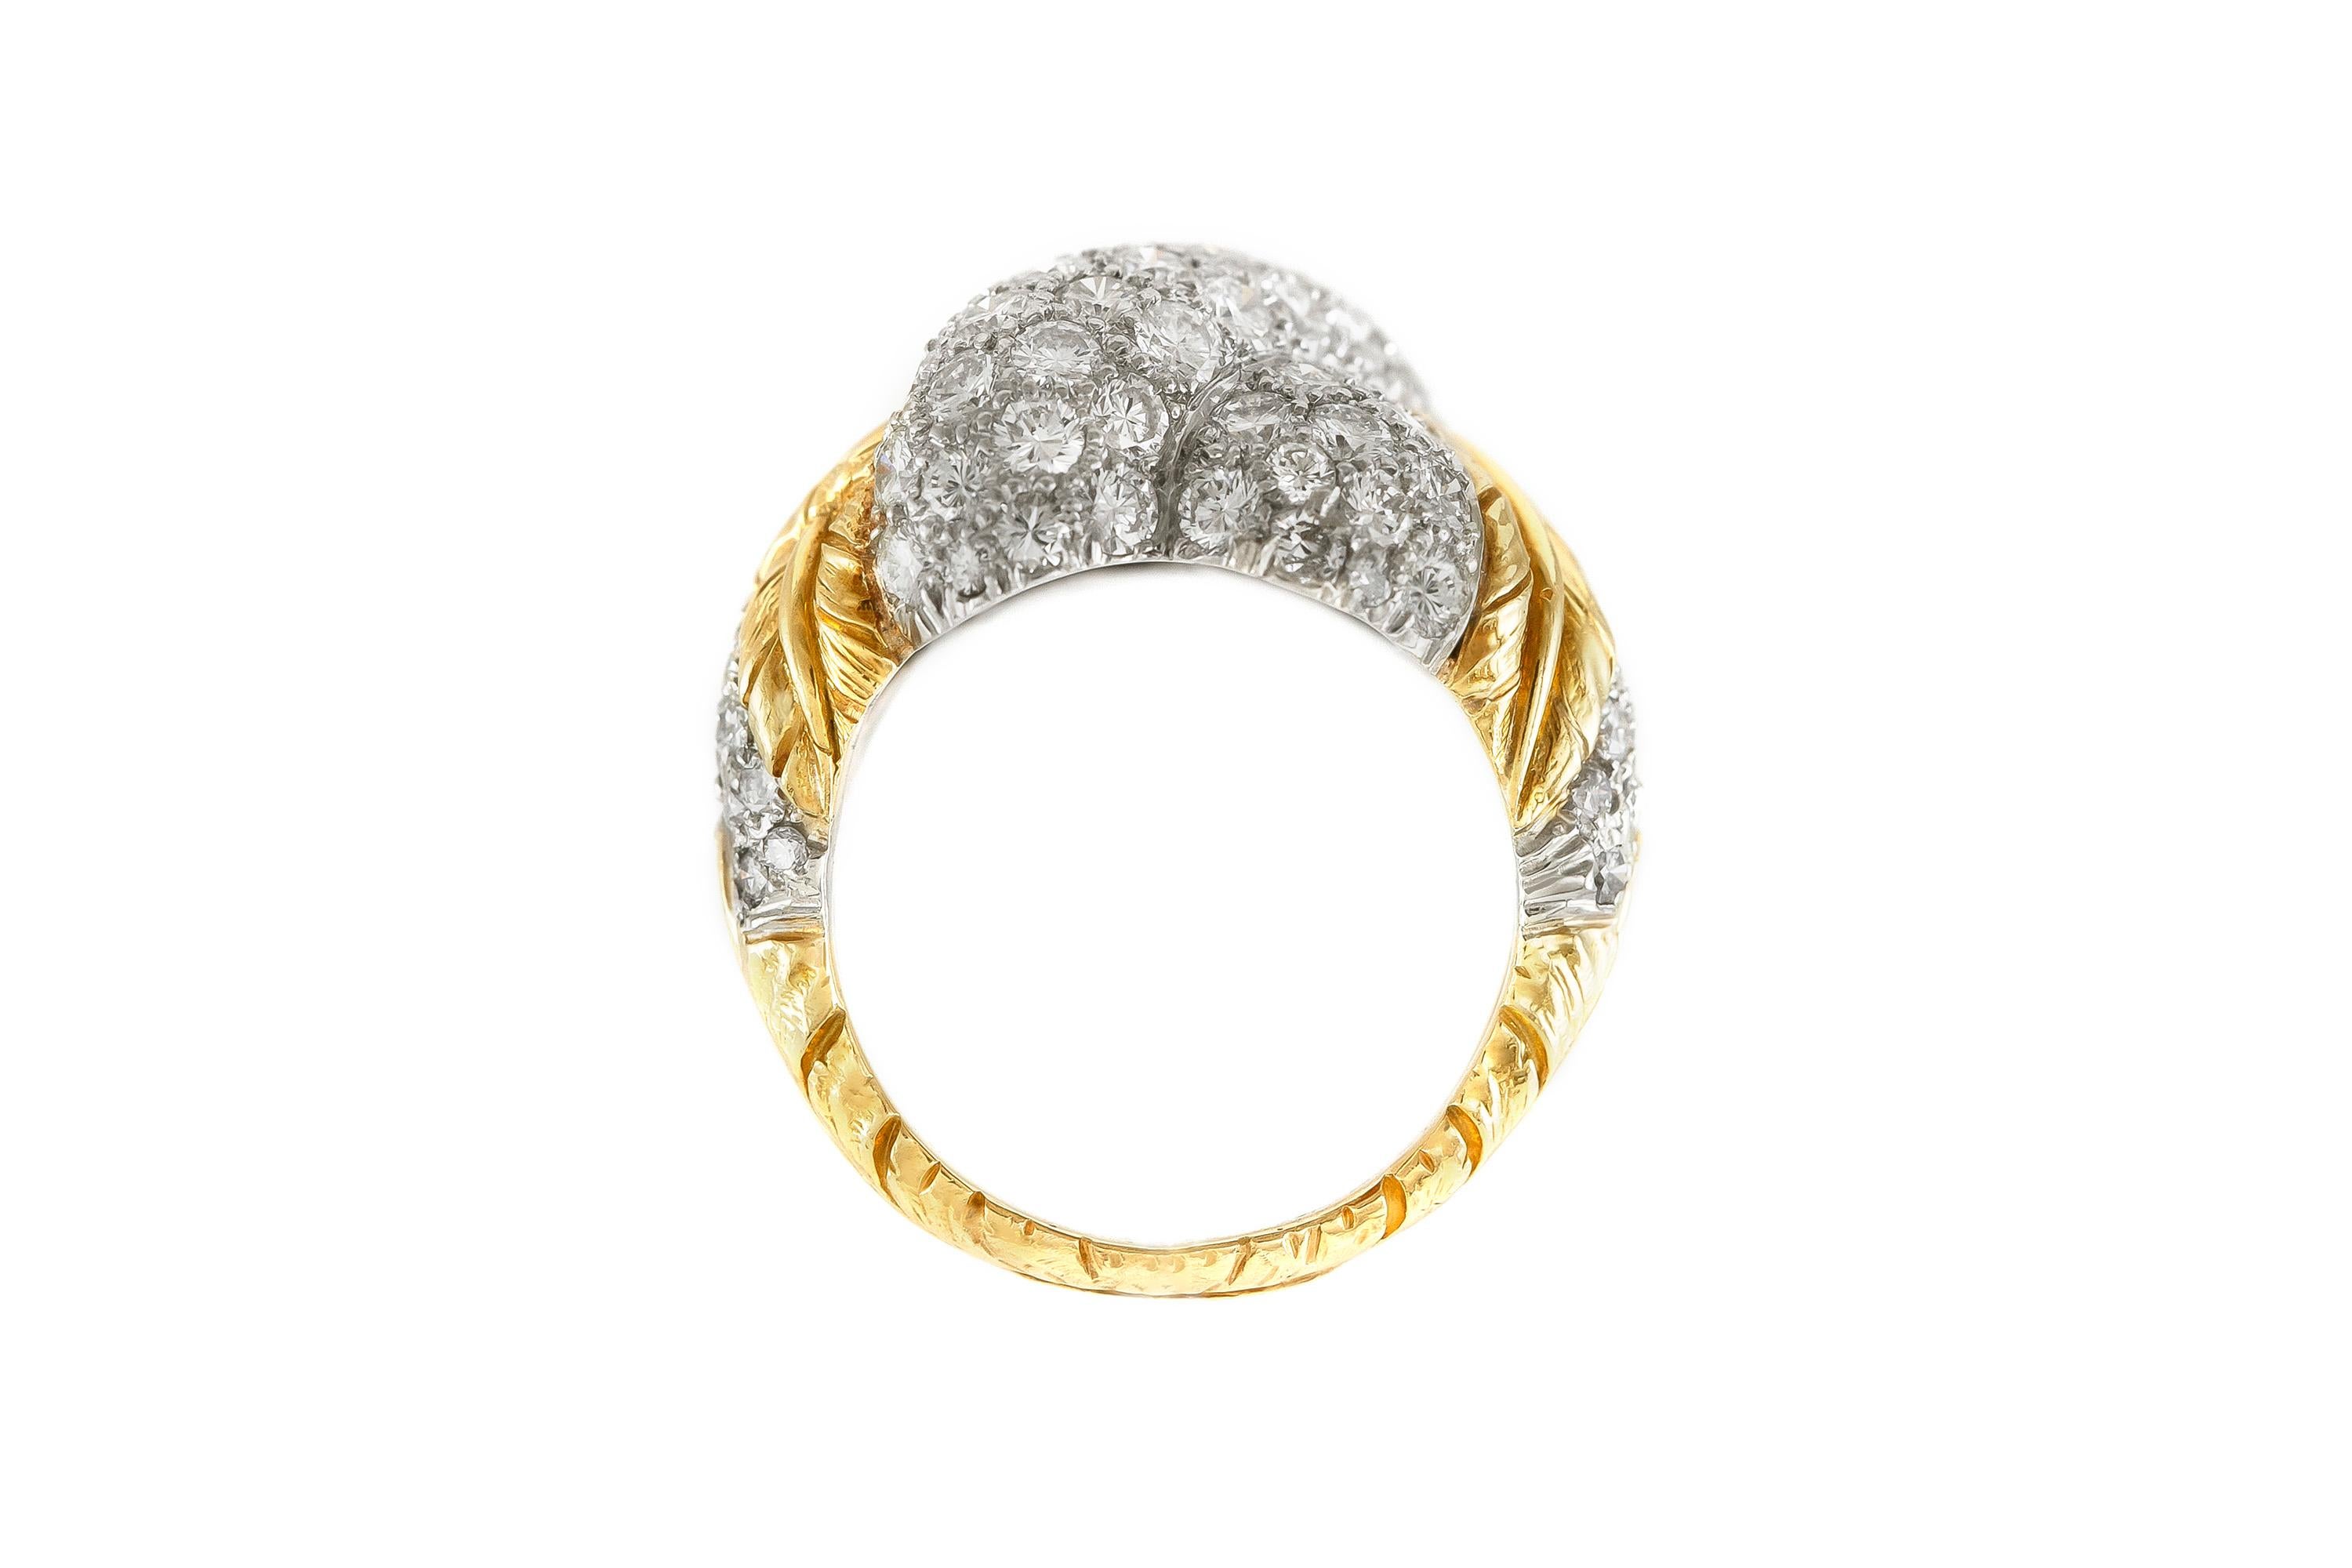 The ring if finely crafted in 14k yellow gold with diamonds weighin approximately total 4.50 carat.
Circa 1980